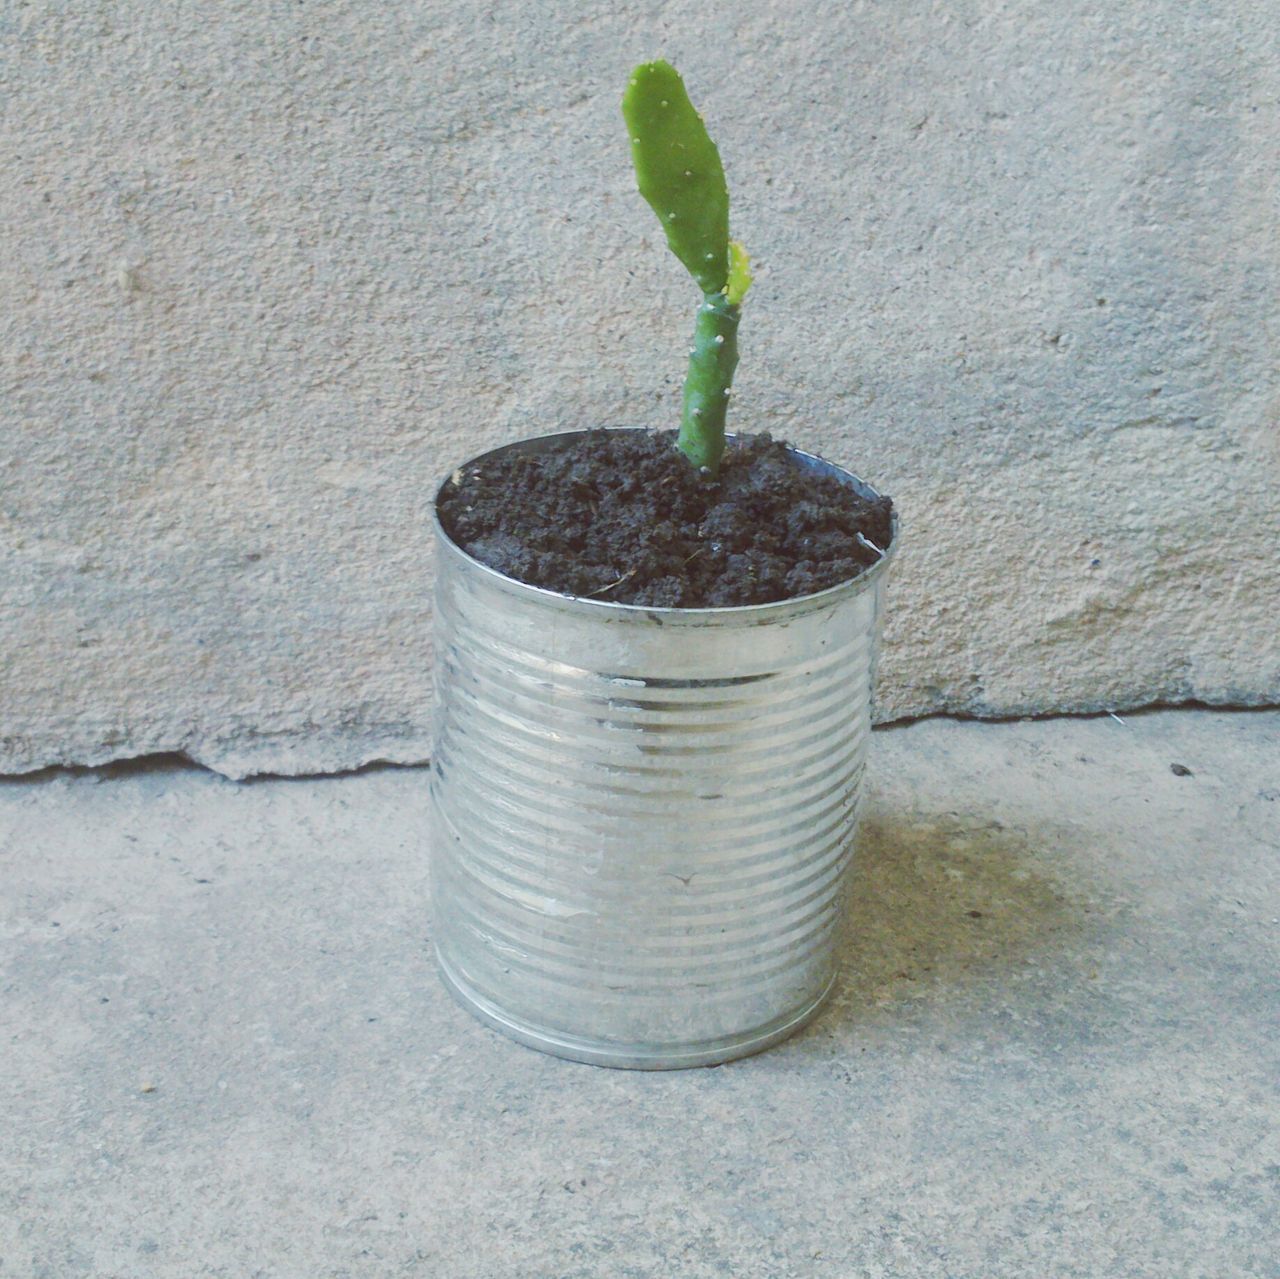 CLOSE-UP OF POTTED PLANT